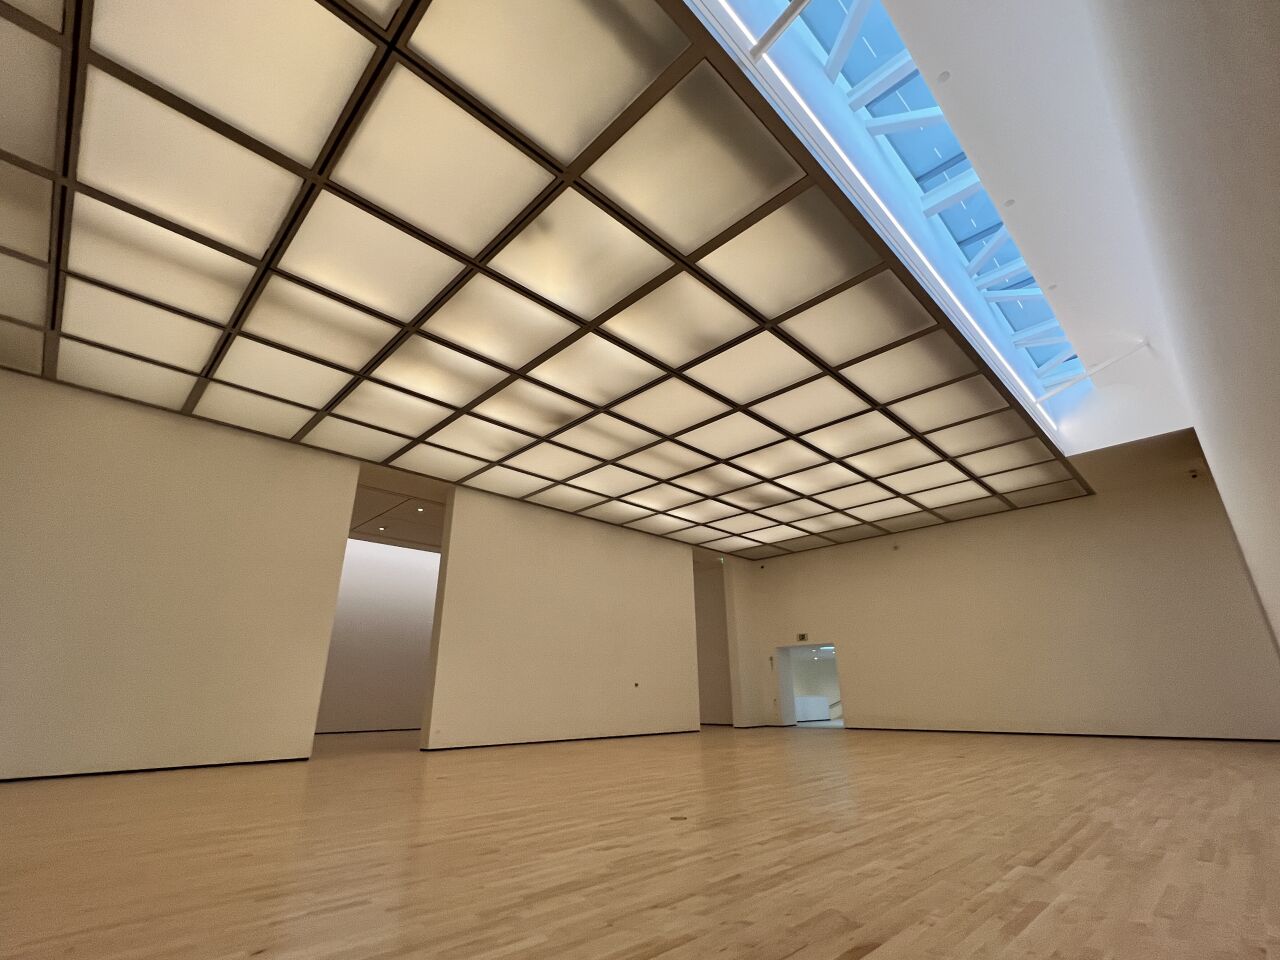 The expansive suite of Strauss gallery spaces will function as a special exhibits hall.